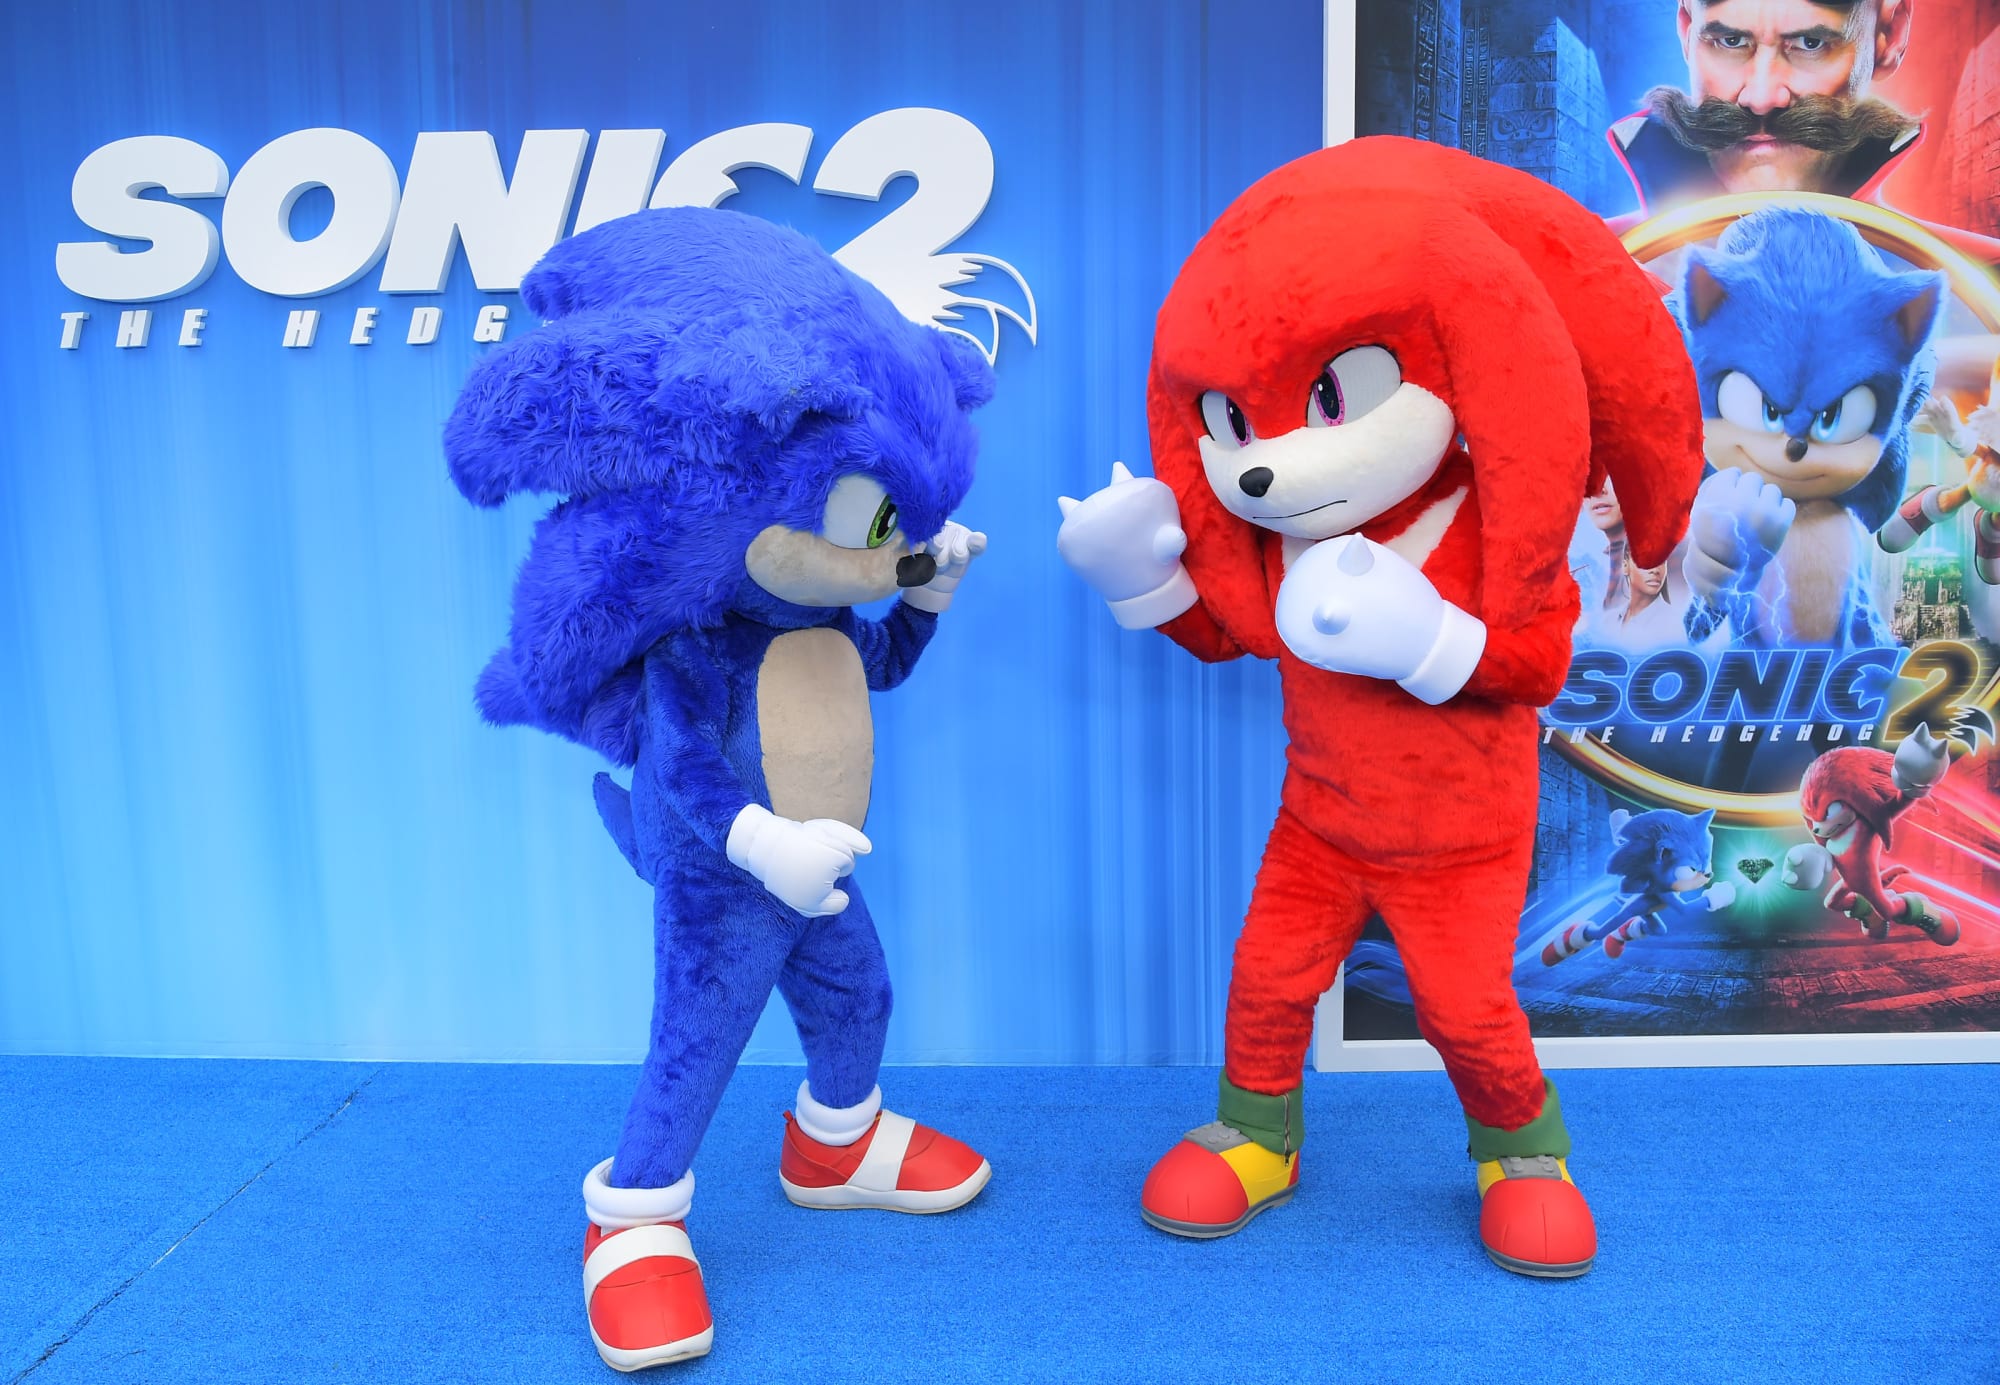 Sonic the Hedgehog would be one of the worst crossover additions ever